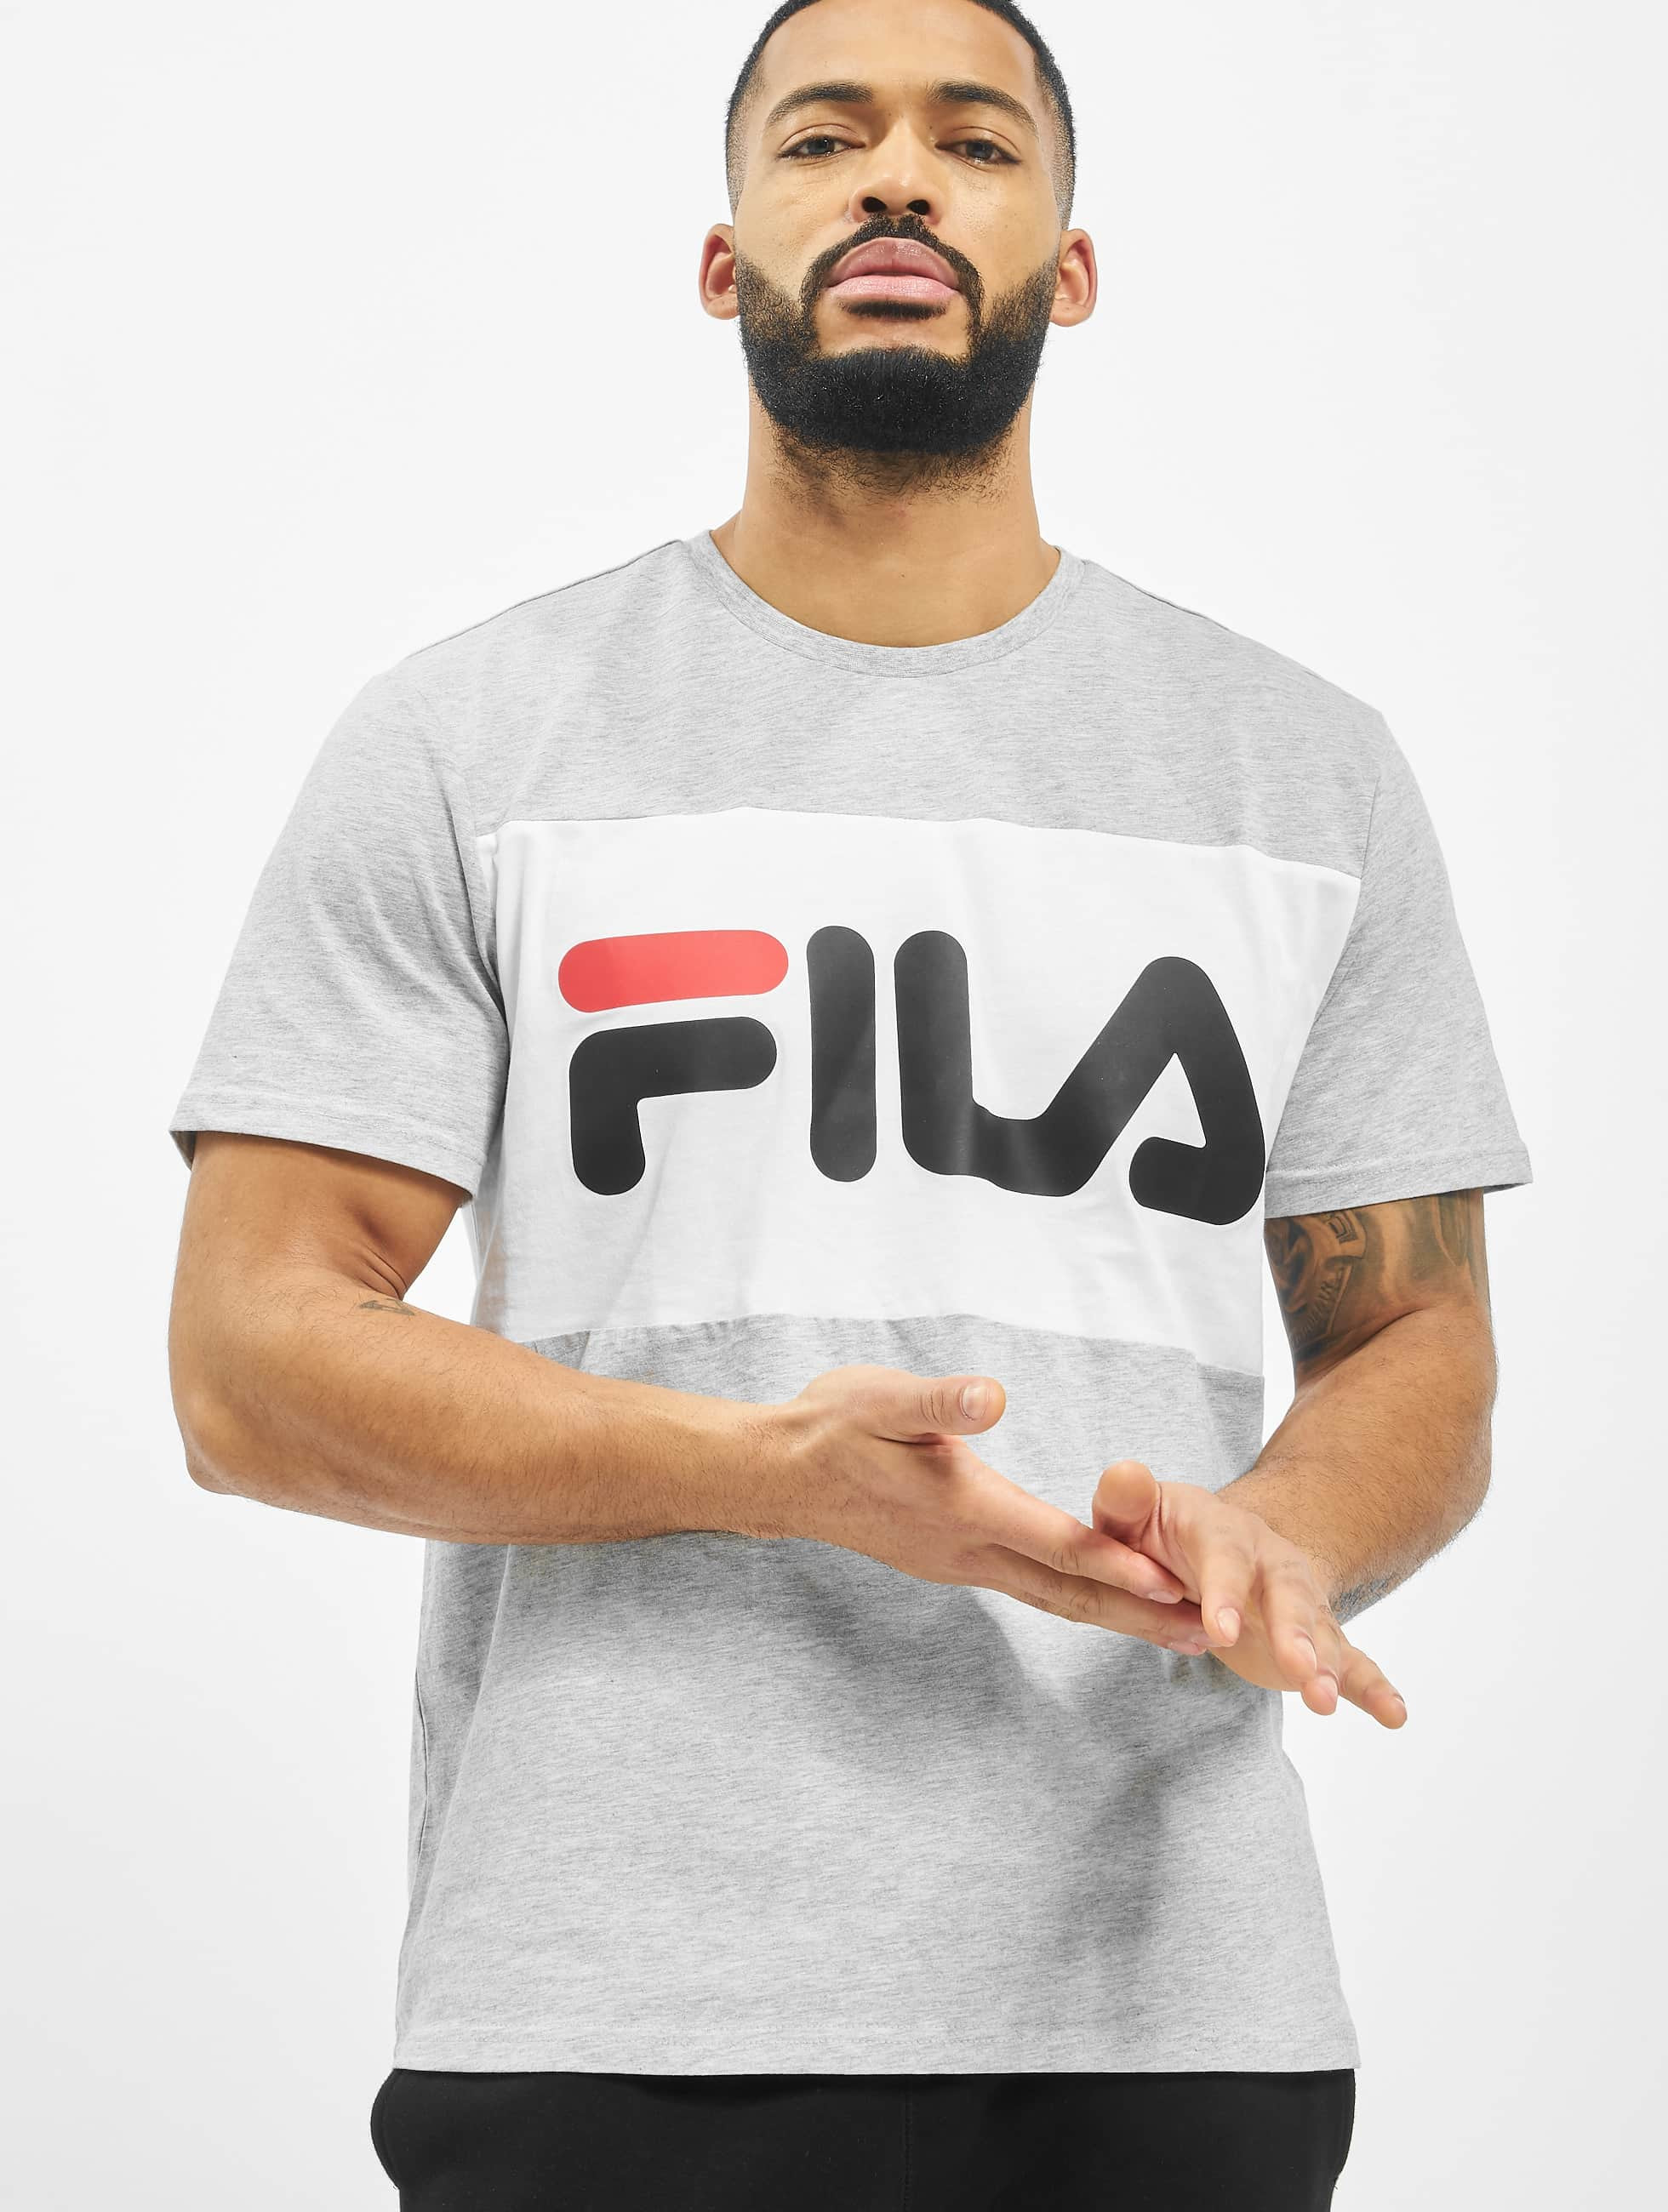 Acquiesce Nybegynder Clancy FILA Overwear / T-Shirt Day in grey 633362